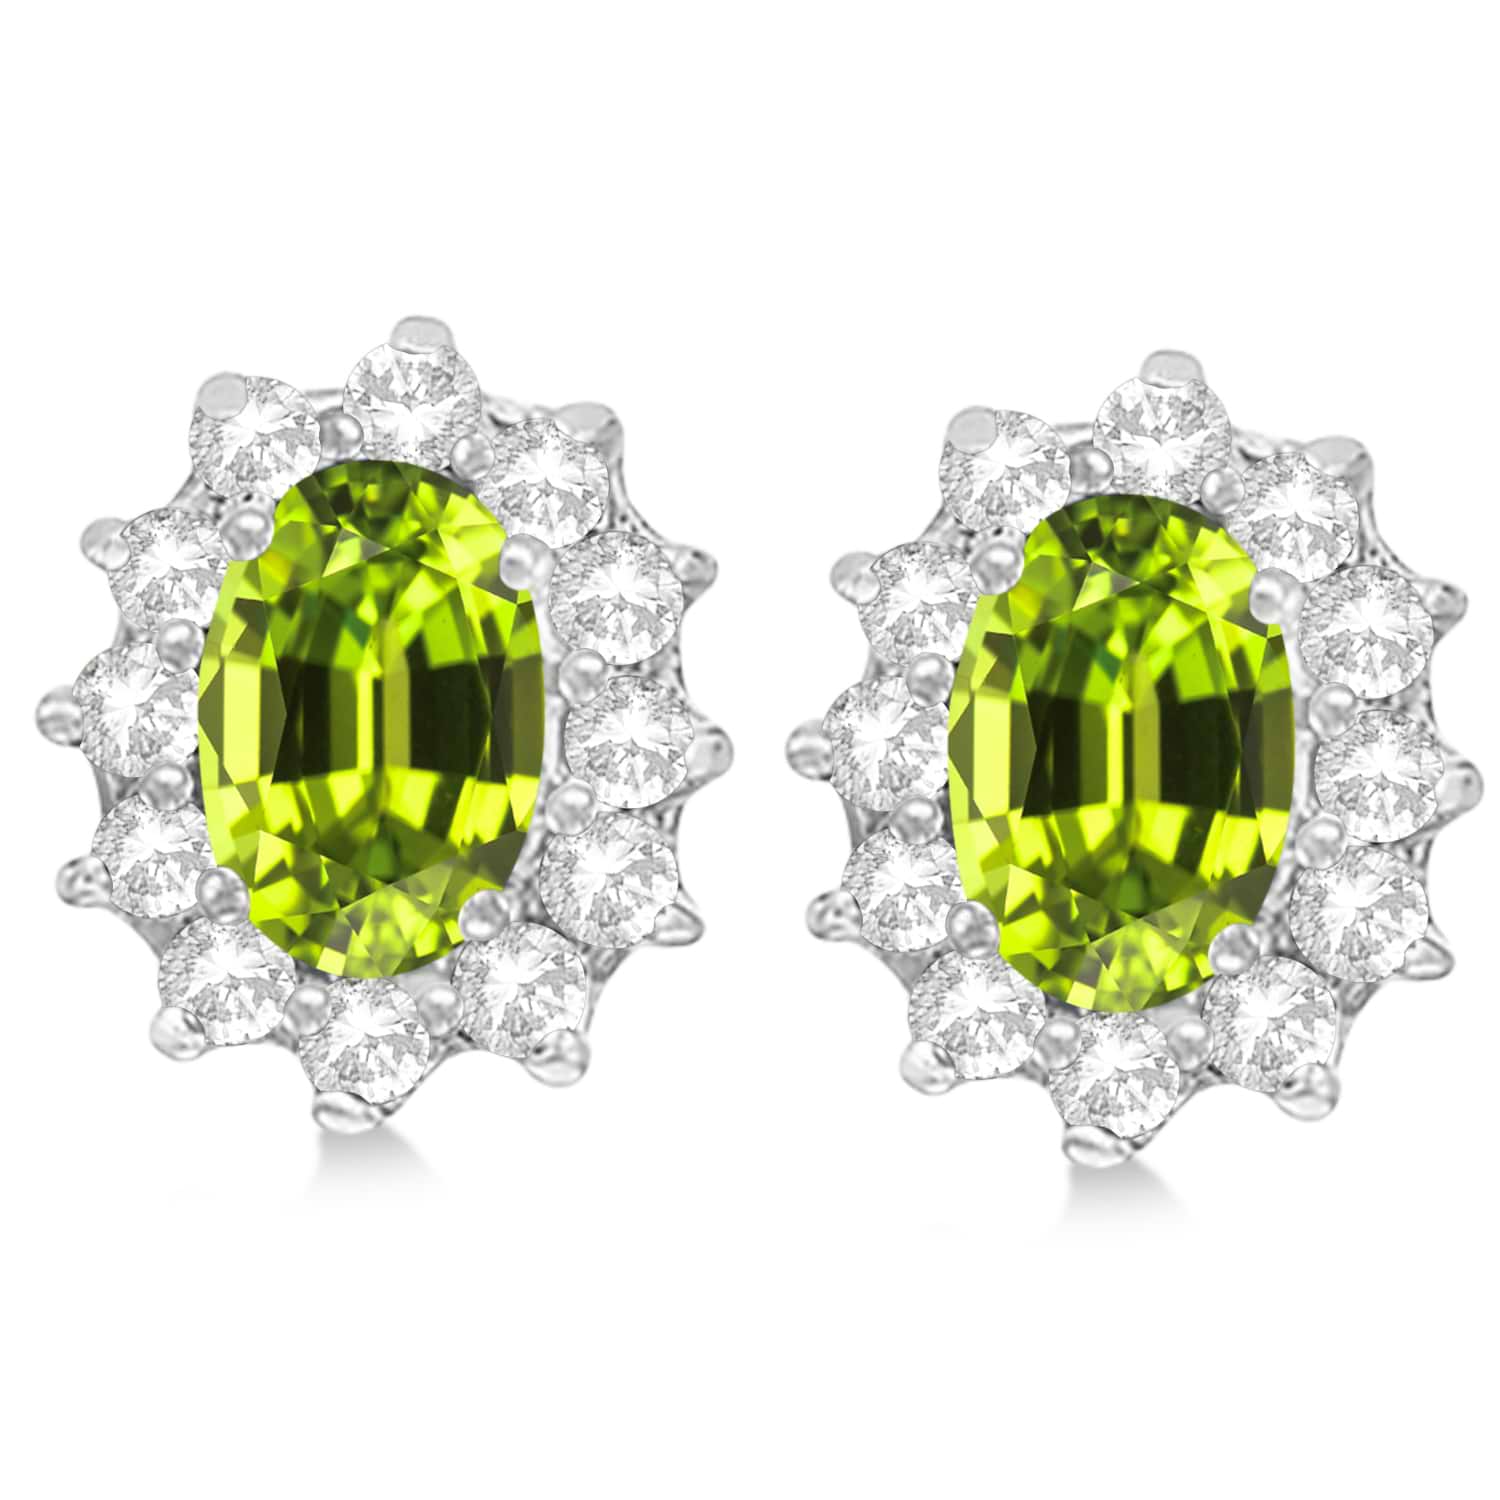 Oval Peridot & Diamond Accented Earrings 14k White Gold (2.05ct)